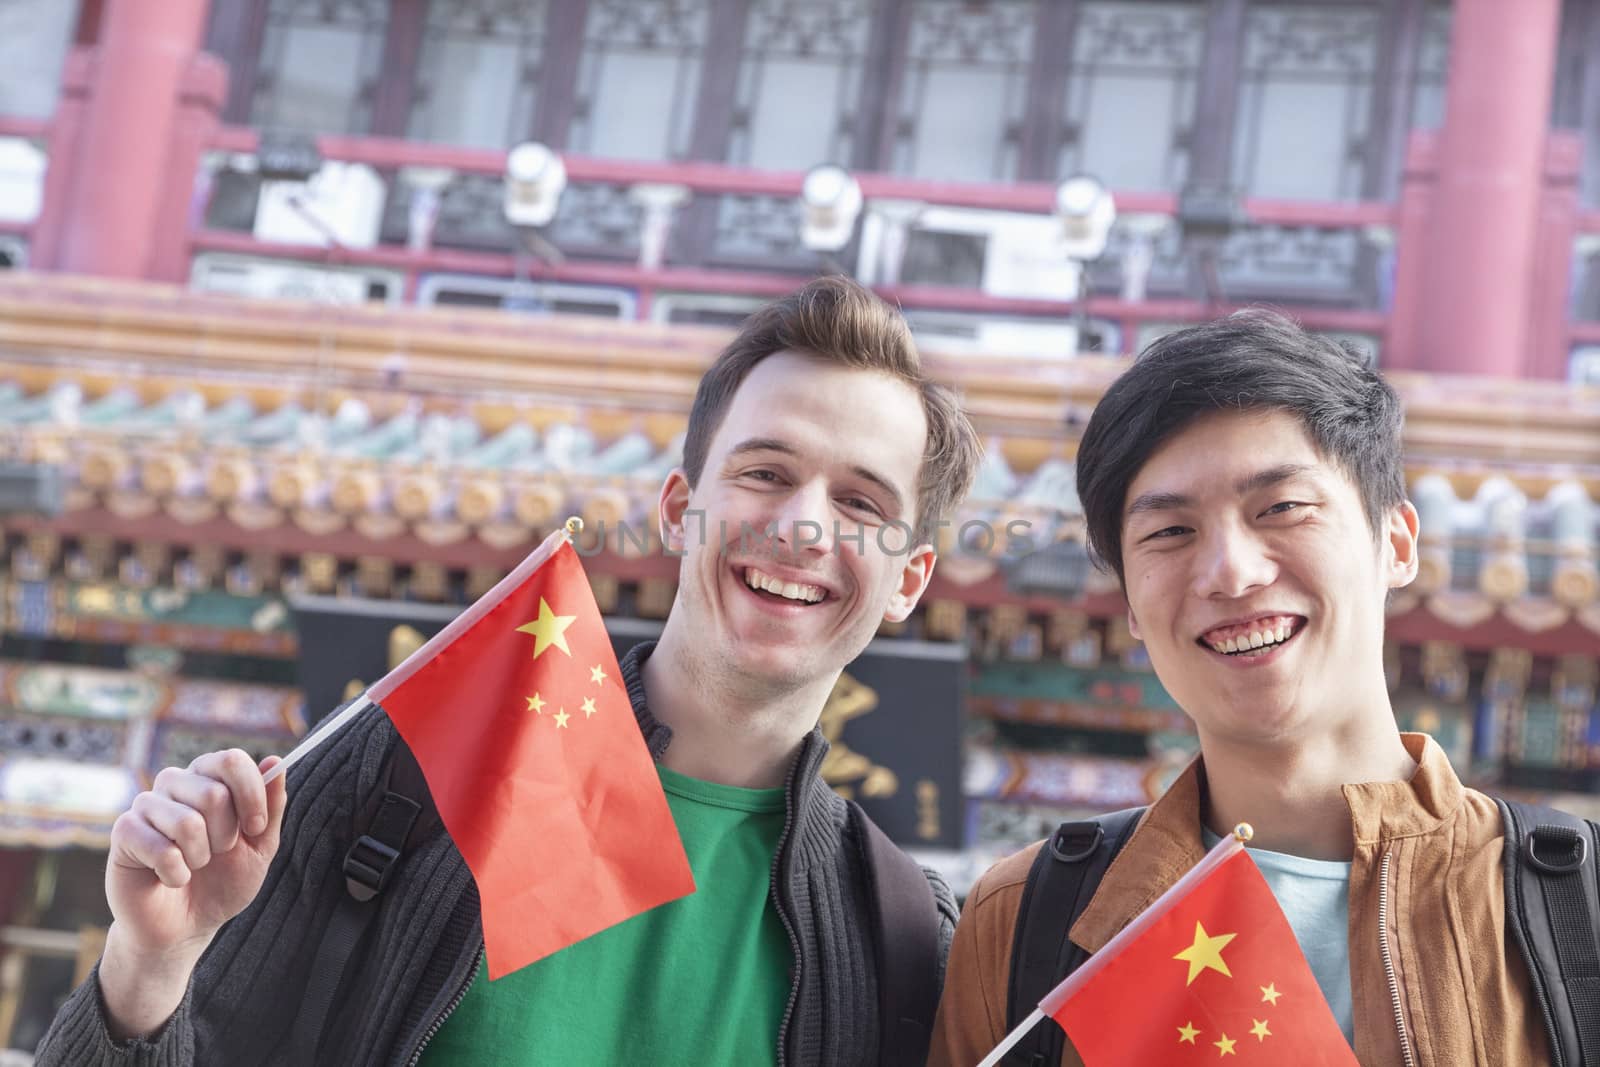 Two young men holding Chinese flags.